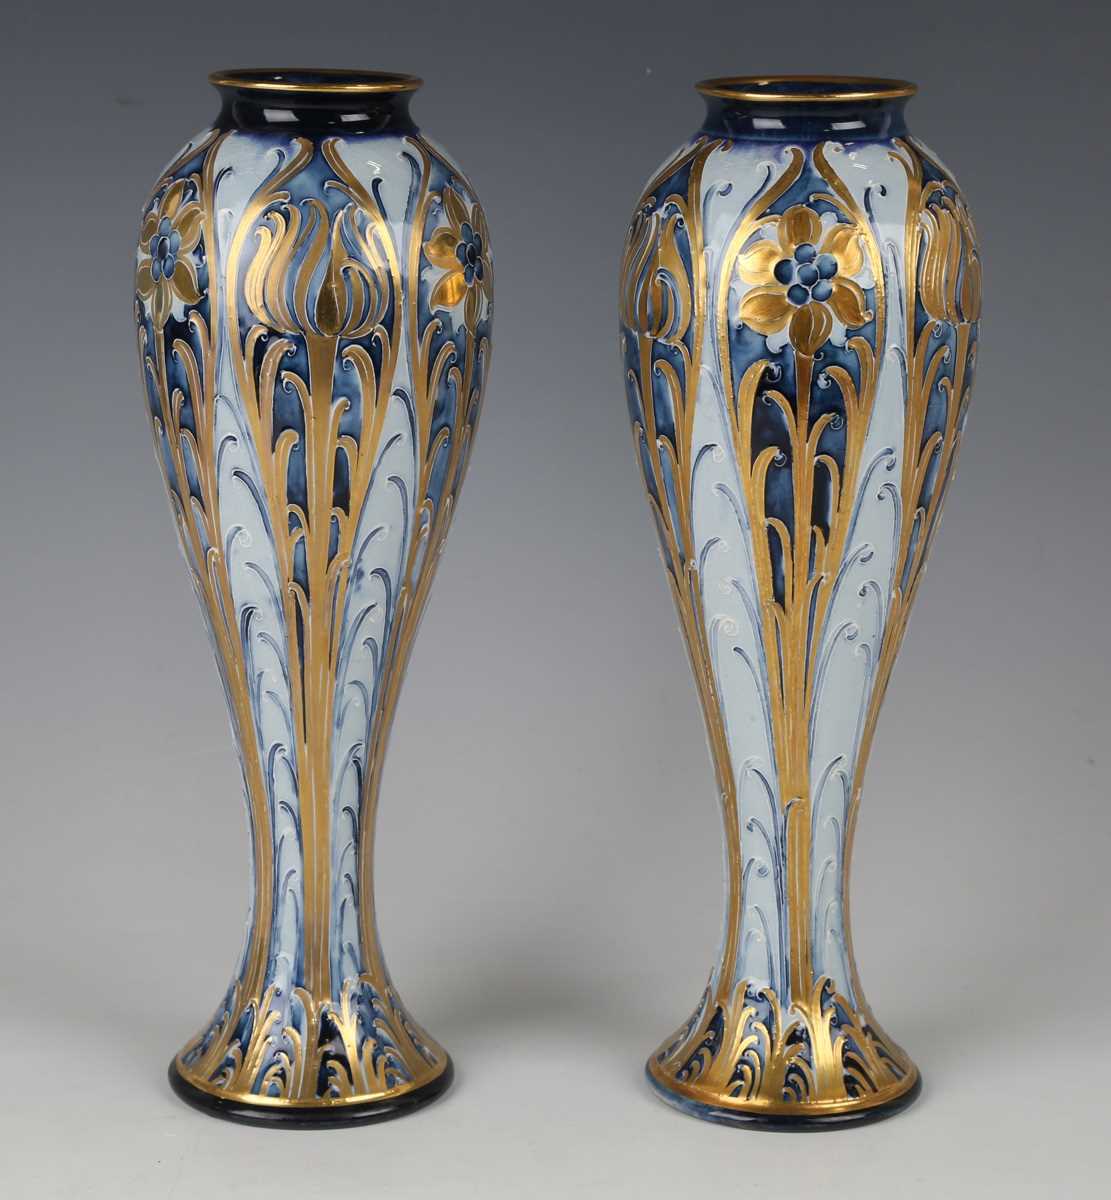 A pair of Macintyre Moorcroft blue and gold Florian design vases, early 20th century, with tall